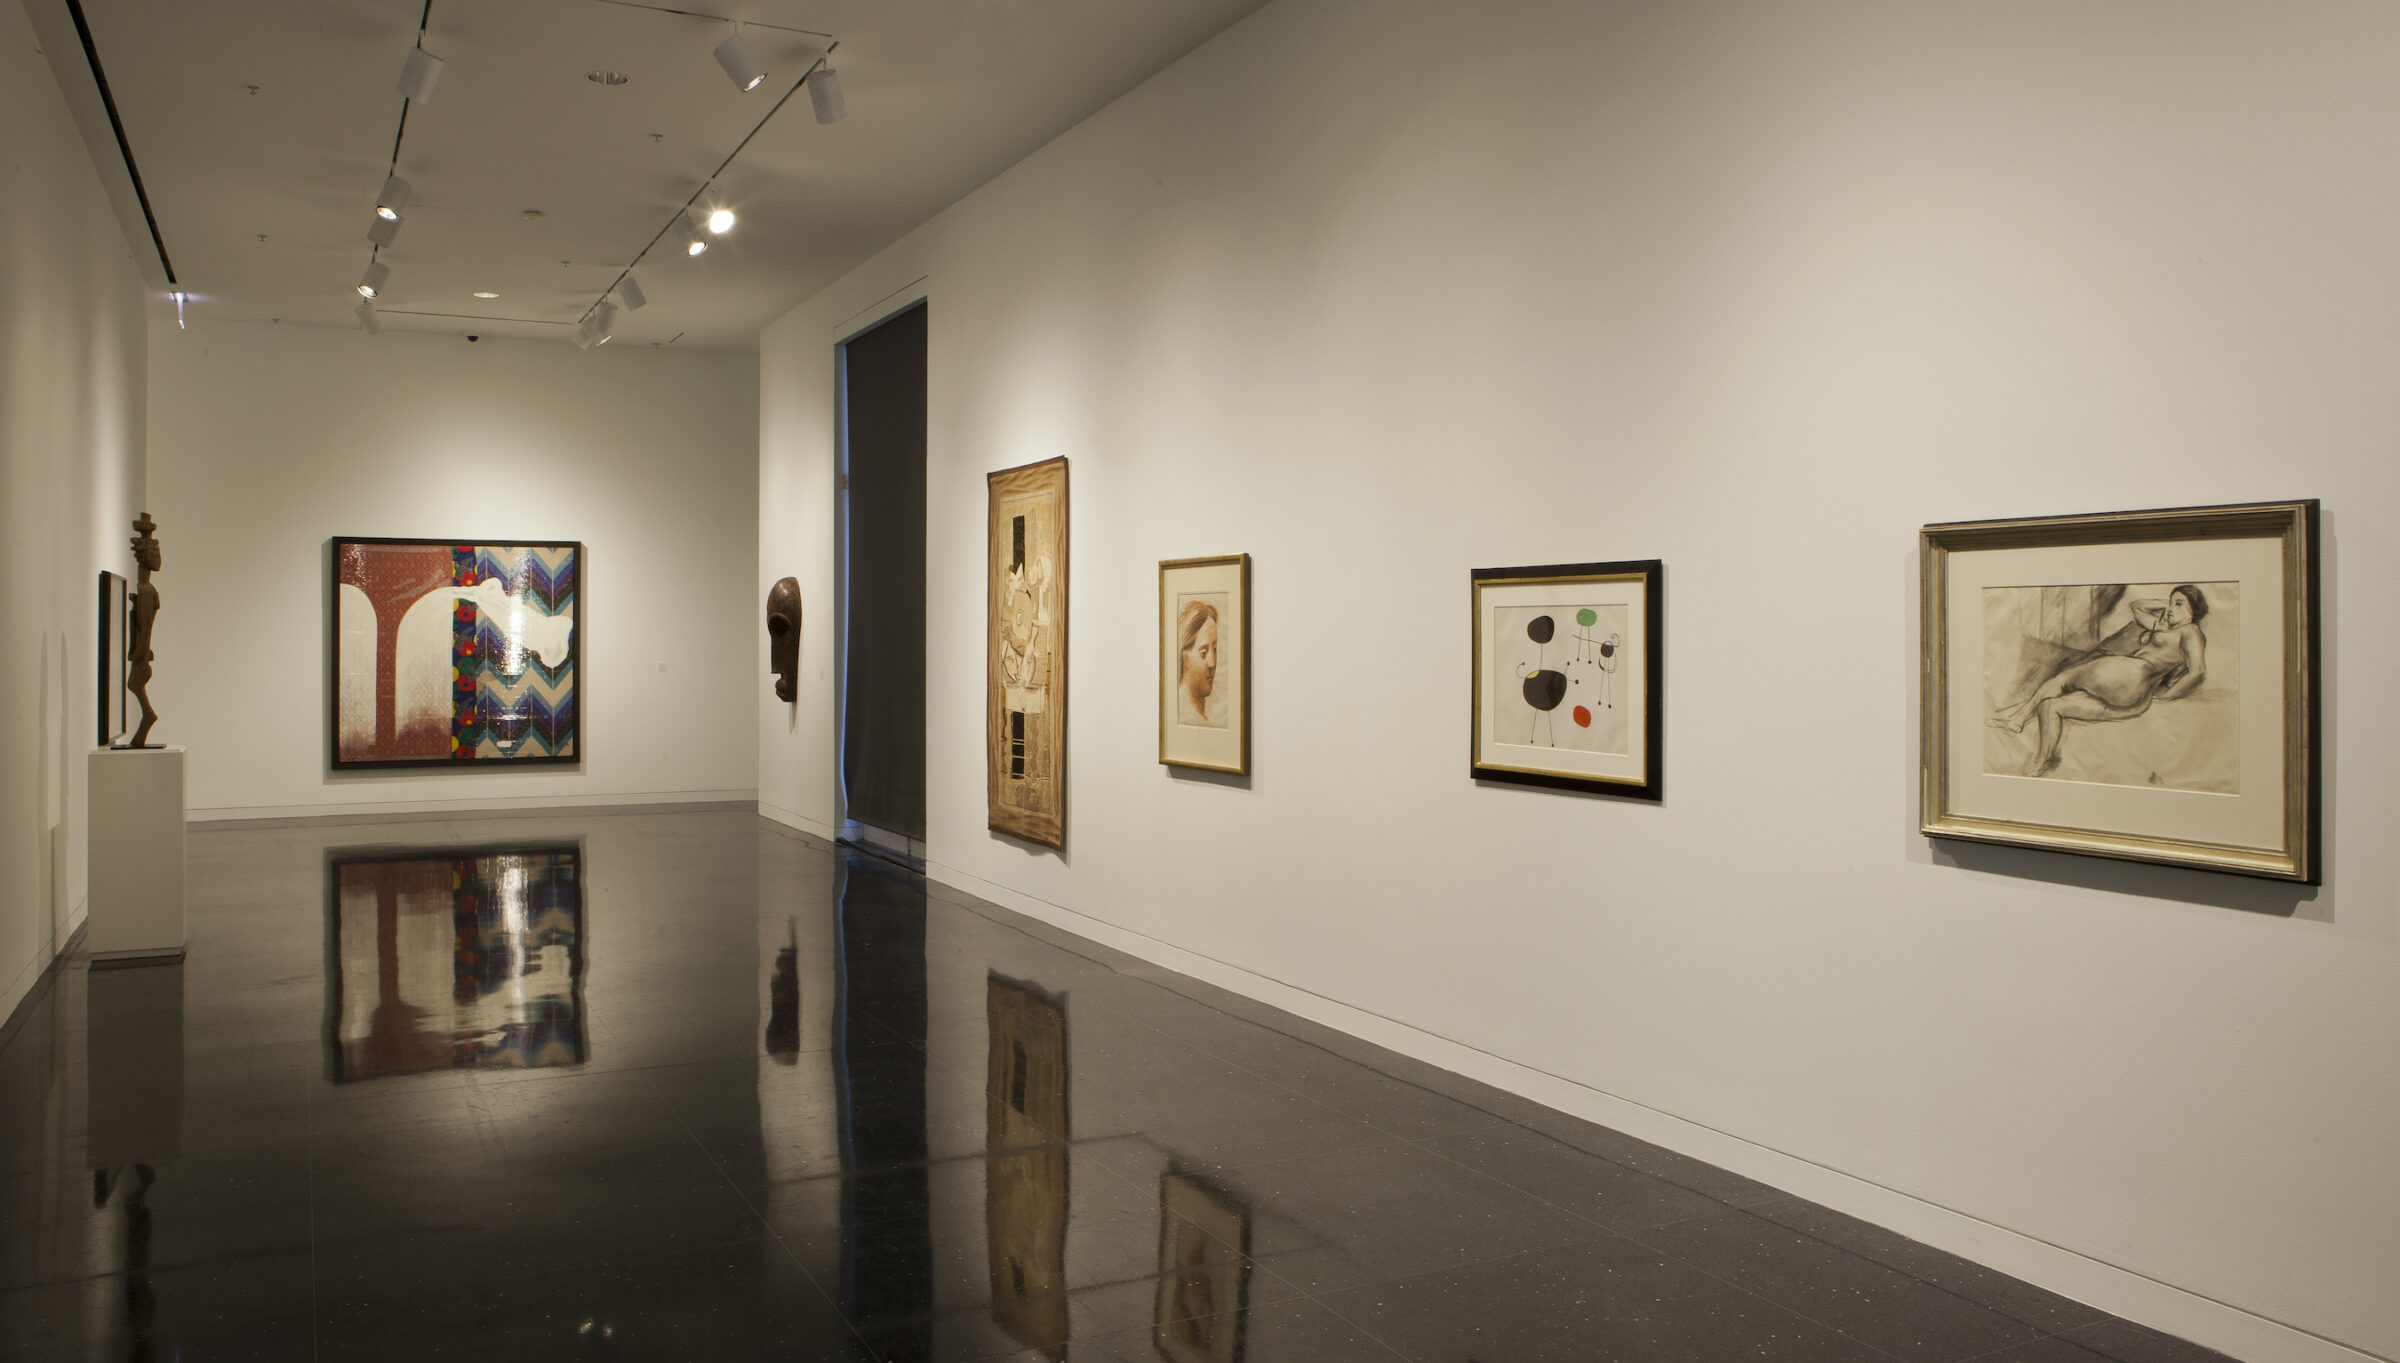 A white walled gallery featuring drawings by Matisse, Miro, and Picasso from The Arts Club's permanent collection, arranged in a horizontal line on the wall.